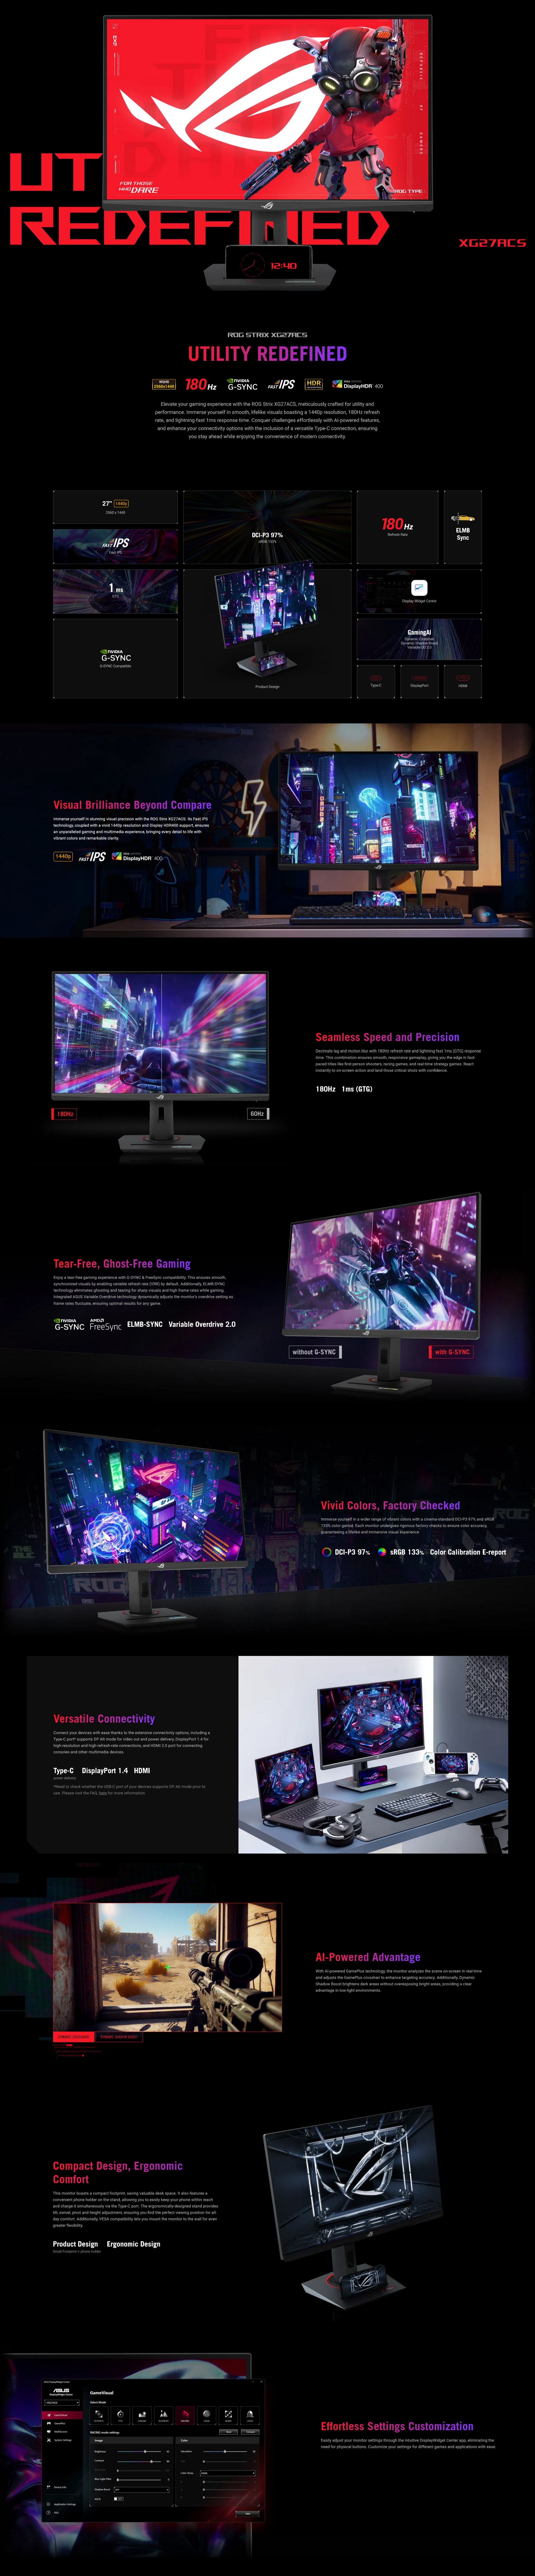 A large marketing image providing additional information about the product ASUS ROG Strix XG27ACS 27" WQHD 180Hz Fast IPS Monitor - Additional alt info not provided